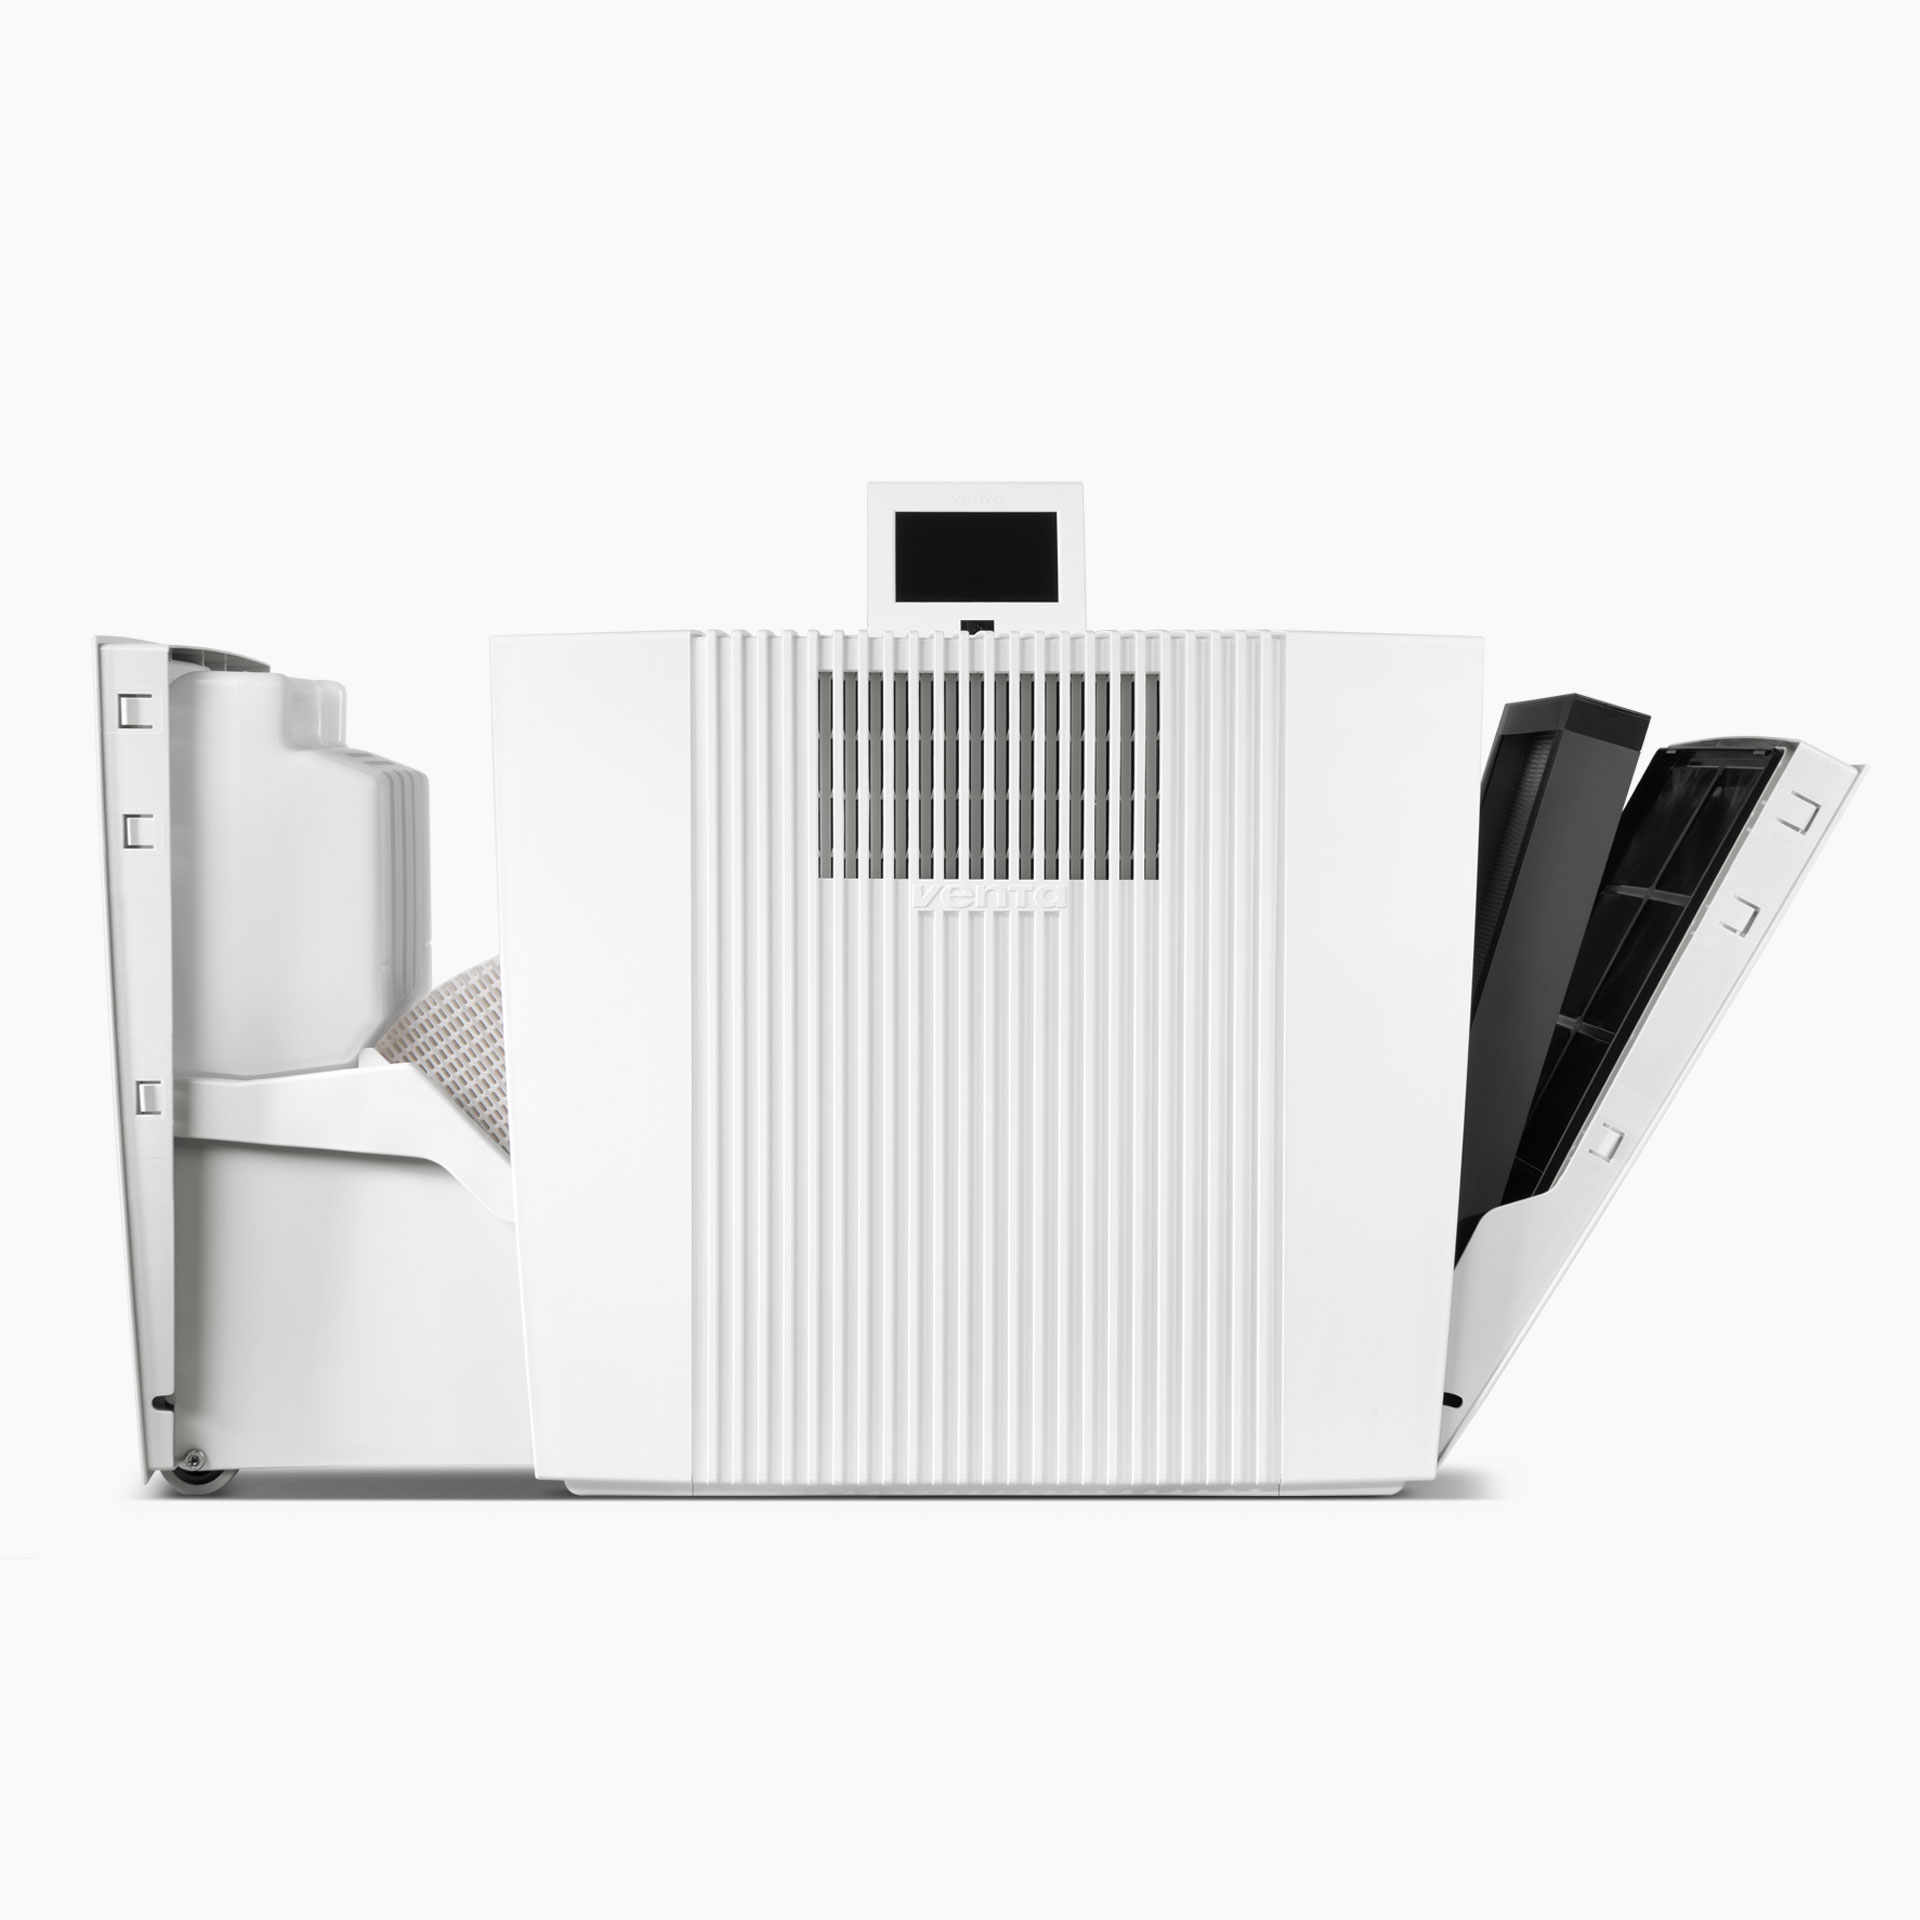 LPH60 WiFi App Control  Airwasher - Limited White Edition